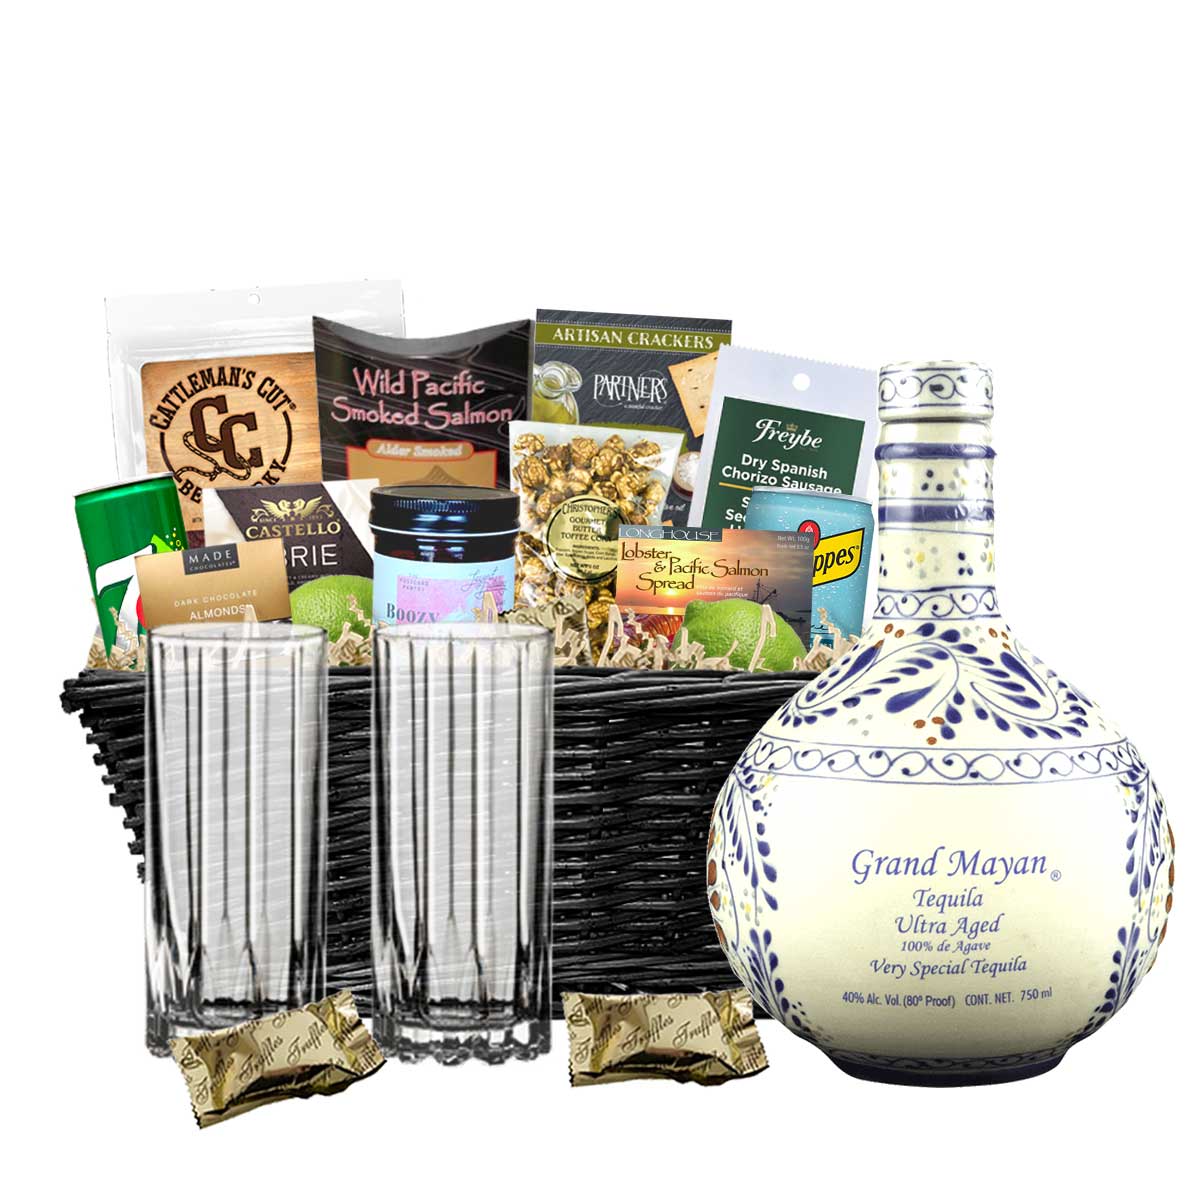 TAG Liquor Stores BC - Grand Mayan Ultra Aged Tequila 750ml Gift Basket